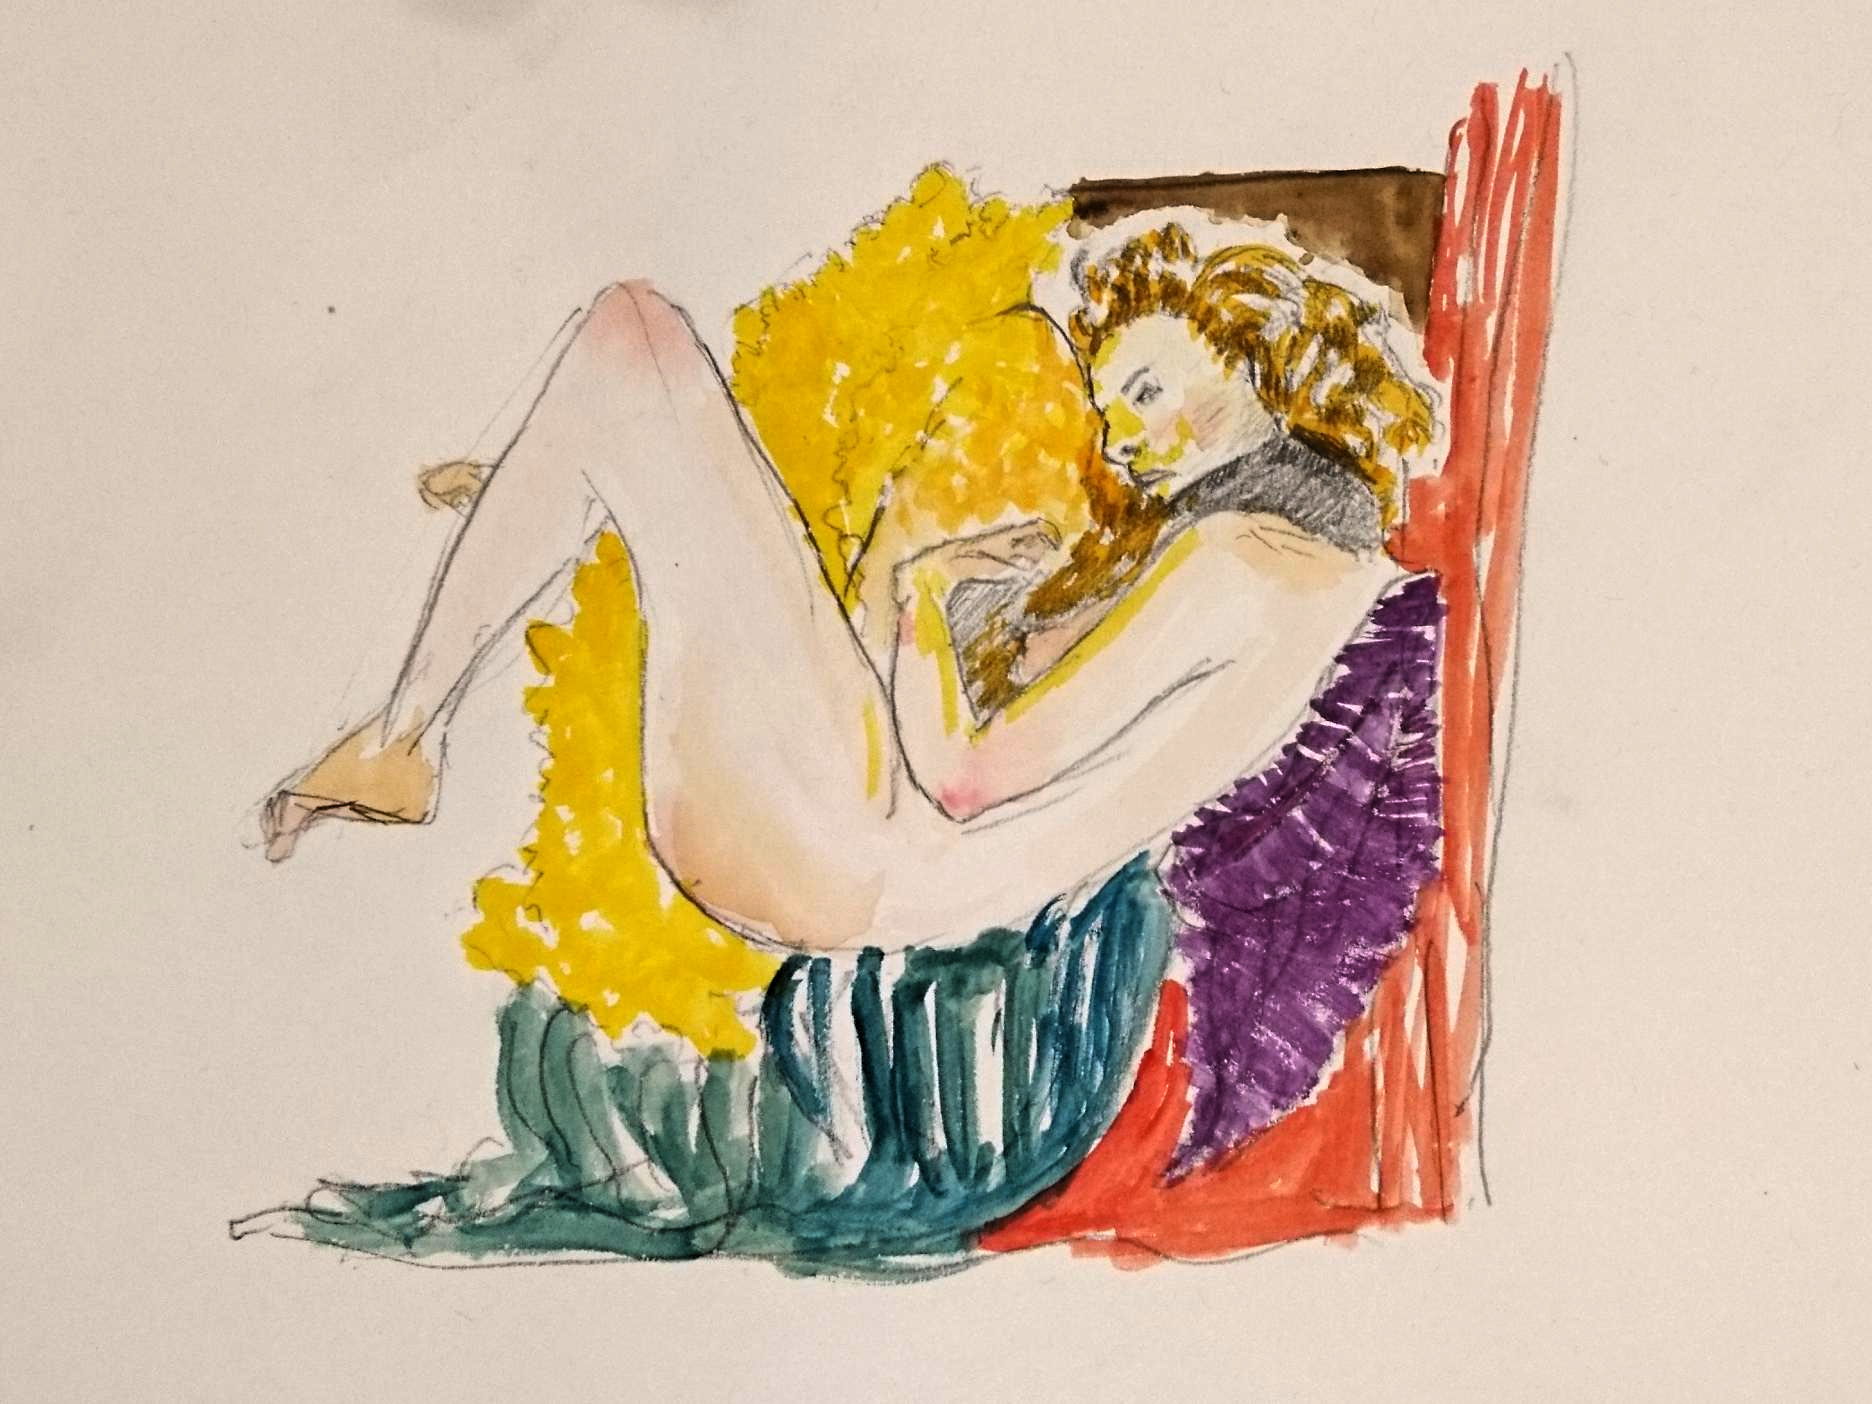 pencil drawing and watercolour painting of a red-haired woman reclining on colourful fabric, in the company of a manifestation of Zeus as a golden cloud